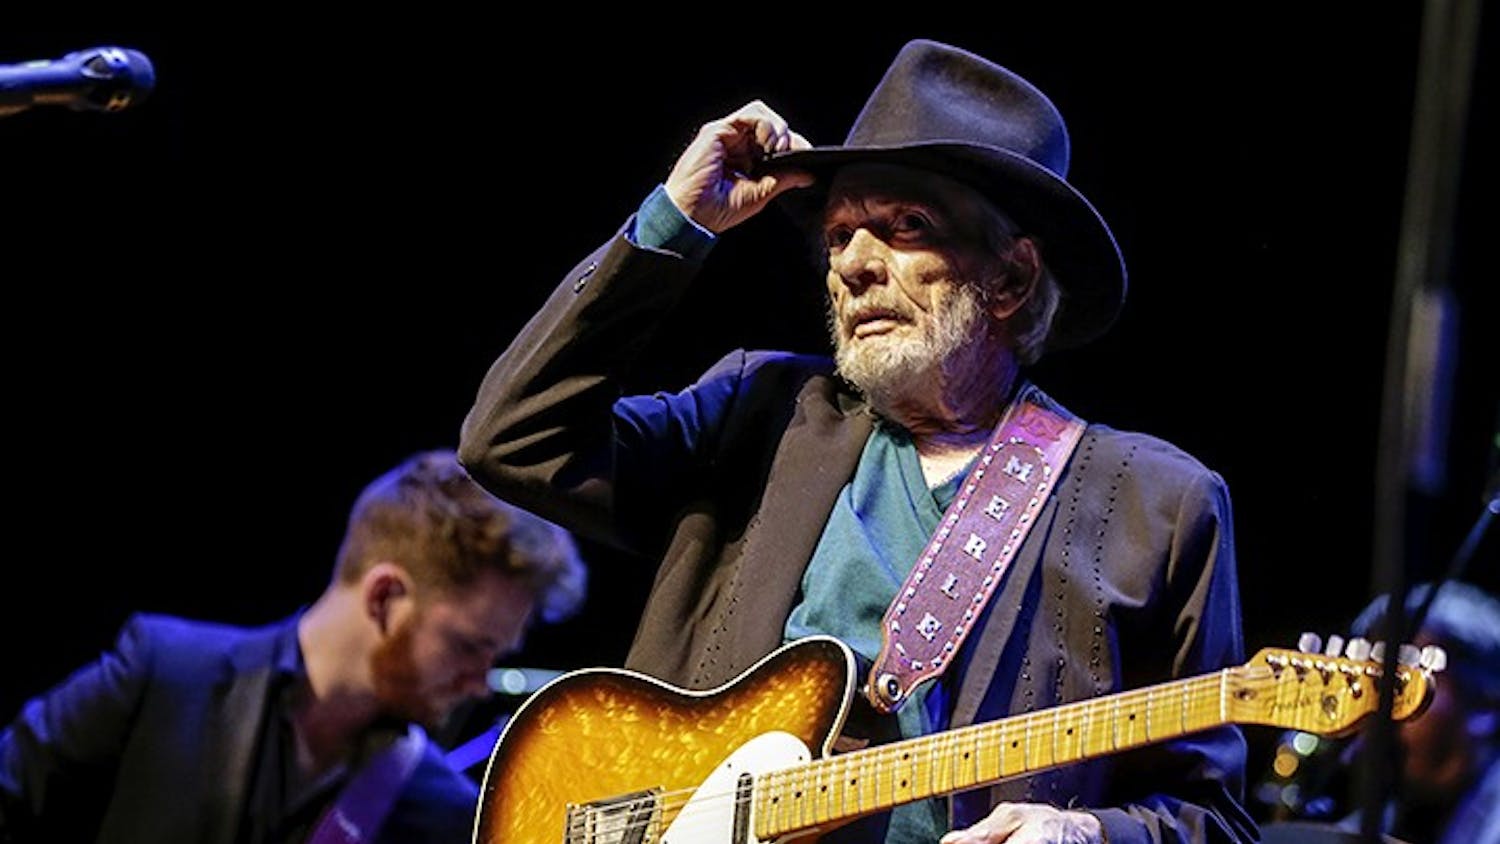 Merle Haggard tips his hat to the audience as he performs at the Saban Theater on Feb. 11, 2016 in Beverly Hills, Calif. Haggard died on April 5, 2016, on his birthday. He was 79. (Robert Gauthier/Los Angeles Times/TNS)